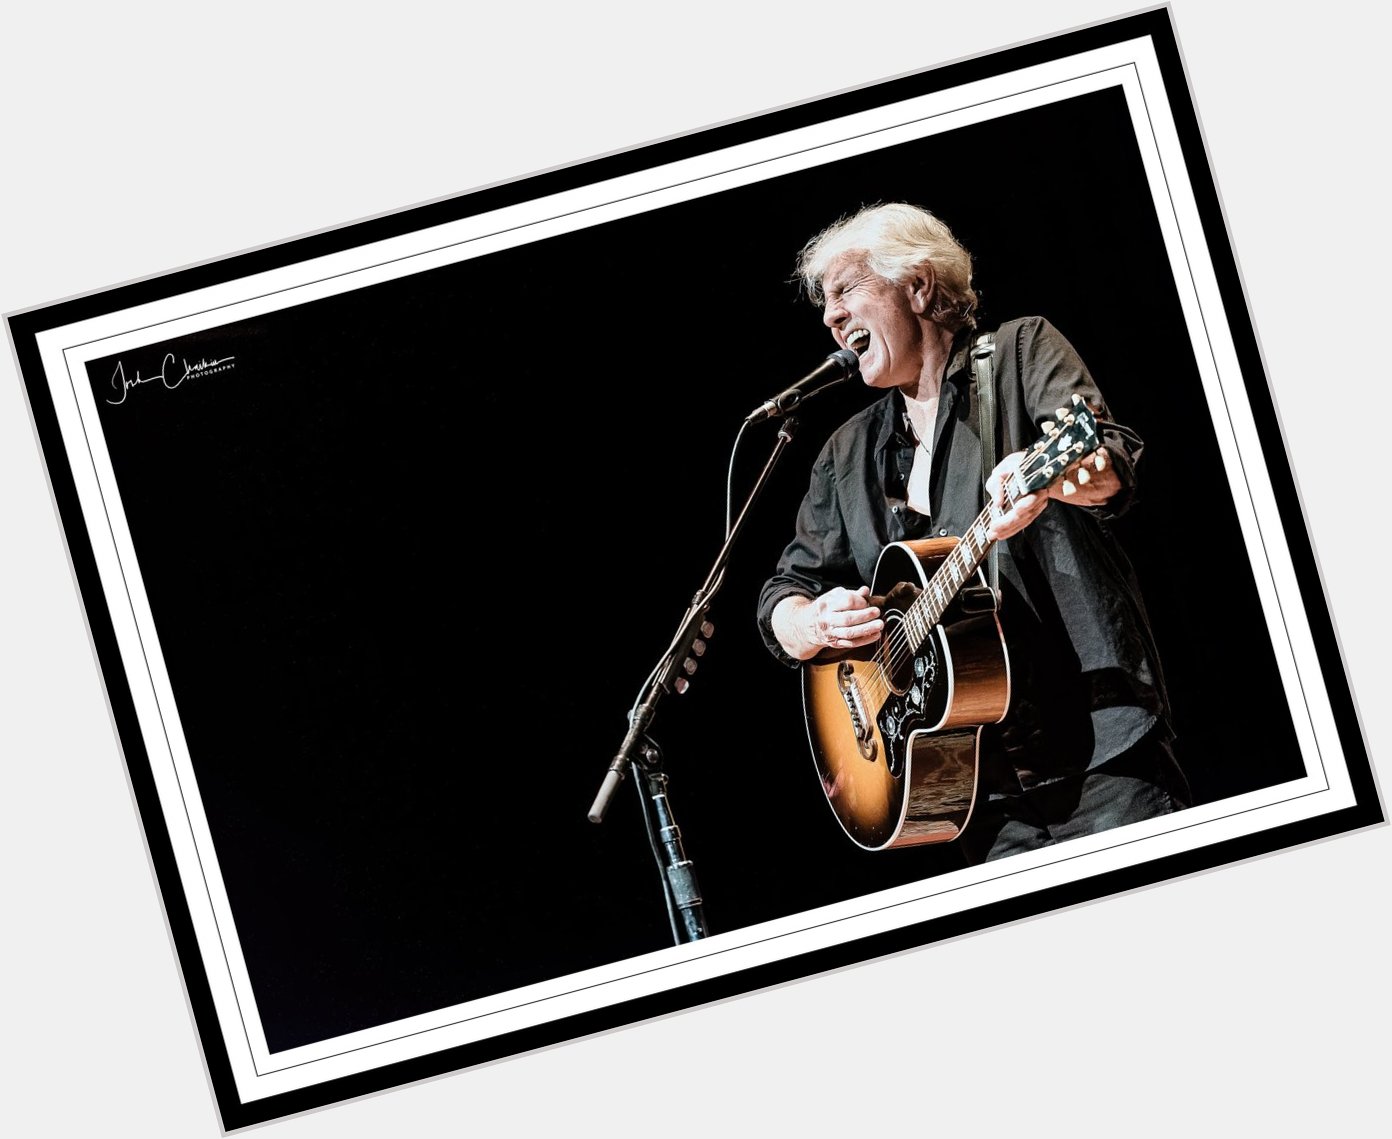 Happy 80th birthday to turning 80 today! What are your favorite Graham Nash songs? 